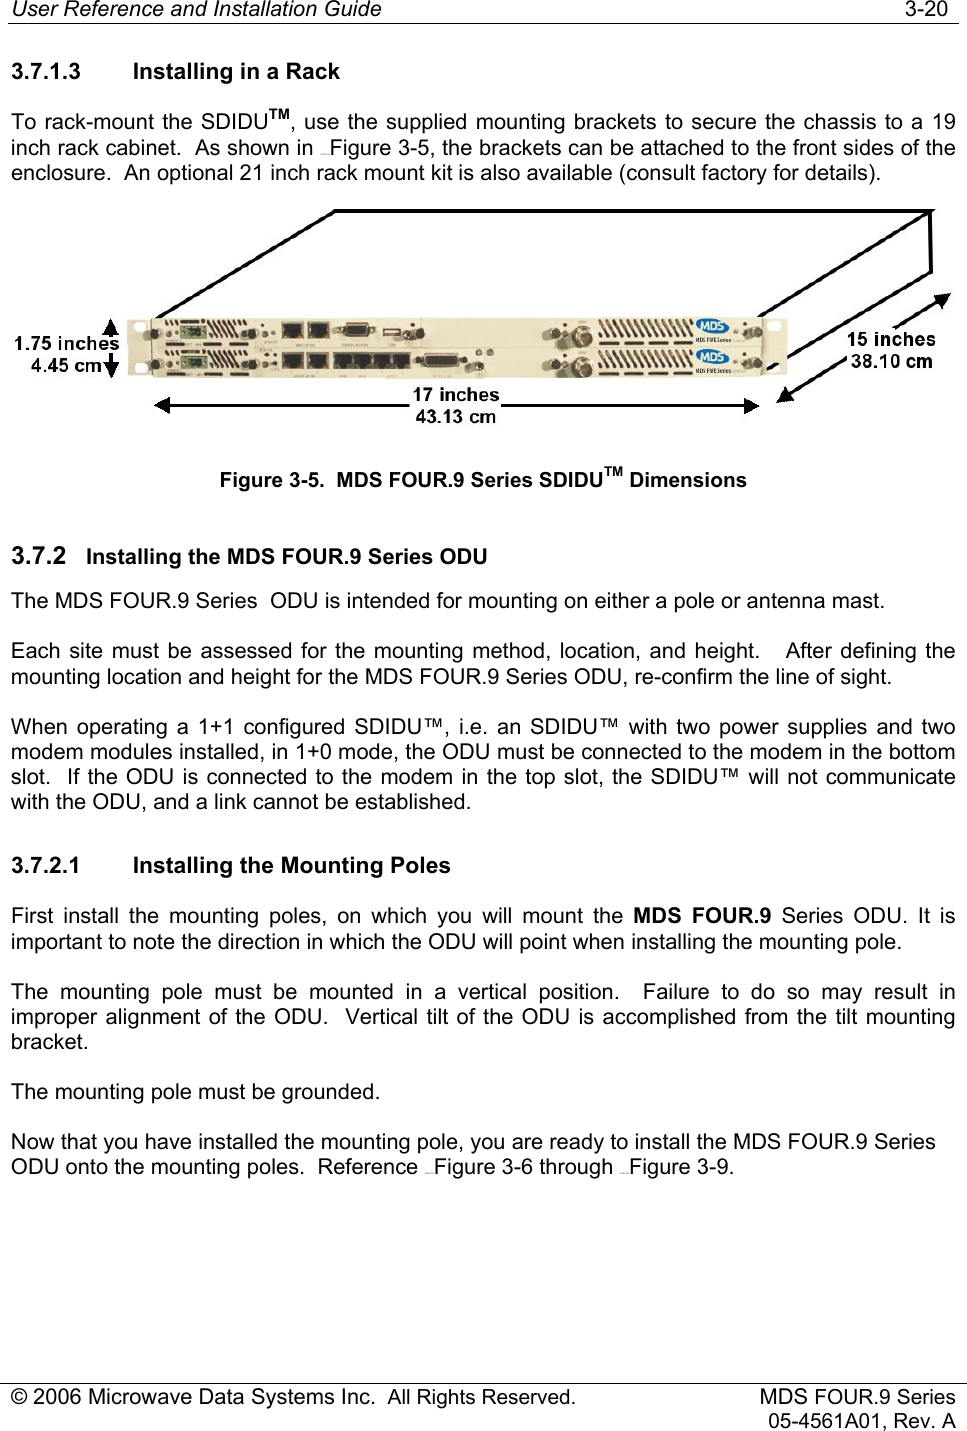 User Reference and Installation Guide   3-20 © 2006 Microwave Data Systems Inc.  All Rights Reserved. MDS FOUR.9 Series 05-4561A01, Rev. A 3.7.1.3  Installing in a Rack To rack-mount the SDIDUTM, use the supplied mounting brackets to secure the chassis to a 19 inch rack cabinet.  As shown in 179H176HFigure 3-5, the brackets can be attached to the front sides of the enclosure.  An optional 21 inch rack mount kit is also available (consult factory for details).  Figure 3-5.  MDS FOUR.9 Series SDIDUTM Dimensions 3.7.2  Installing the MDS FOUR.9 Series ODU The MDS FOUR.9 Series  ODU is intended for mounting on either a pole or antenna mast.  Each site must be assessed for the mounting method, location, and height.   After defining the mounting location and height for the MDS FOUR.9 Series ODU, re-confirm the line of sight. When operating a 1+1 configured SDIDU™, i.e. an SDIDU™ with two power supplies and two modem modules installed, in 1+0 mode, the ODU must be connected to the modem in the bottom slot.  If the ODU is connected to the modem in the top slot, the SDIDU™ will not communicate with the ODU, and a link cannot be established. 3.7.2.1  Installing the Mounting Poles First install the mounting poles, on which you will mount the MDS FOUR.9 Series ODU. It is important to note the direction in which the ODU will point when installing the mounting pole. The mounting pole must be mounted in a vertical position.  Failure to do so may result in improper alignment of the ODU.  Vertical tilt of the ODU is accomplished from the tilt mounting bracket. The mounting pole must be grounded.  Now that you have installed the mounting pole, you are ready to install the MDS FOUR.9 Series ODU onto the mounting poles.  Reference 180H177HFigure 3-6 through 181H178HFigure 3-9. 